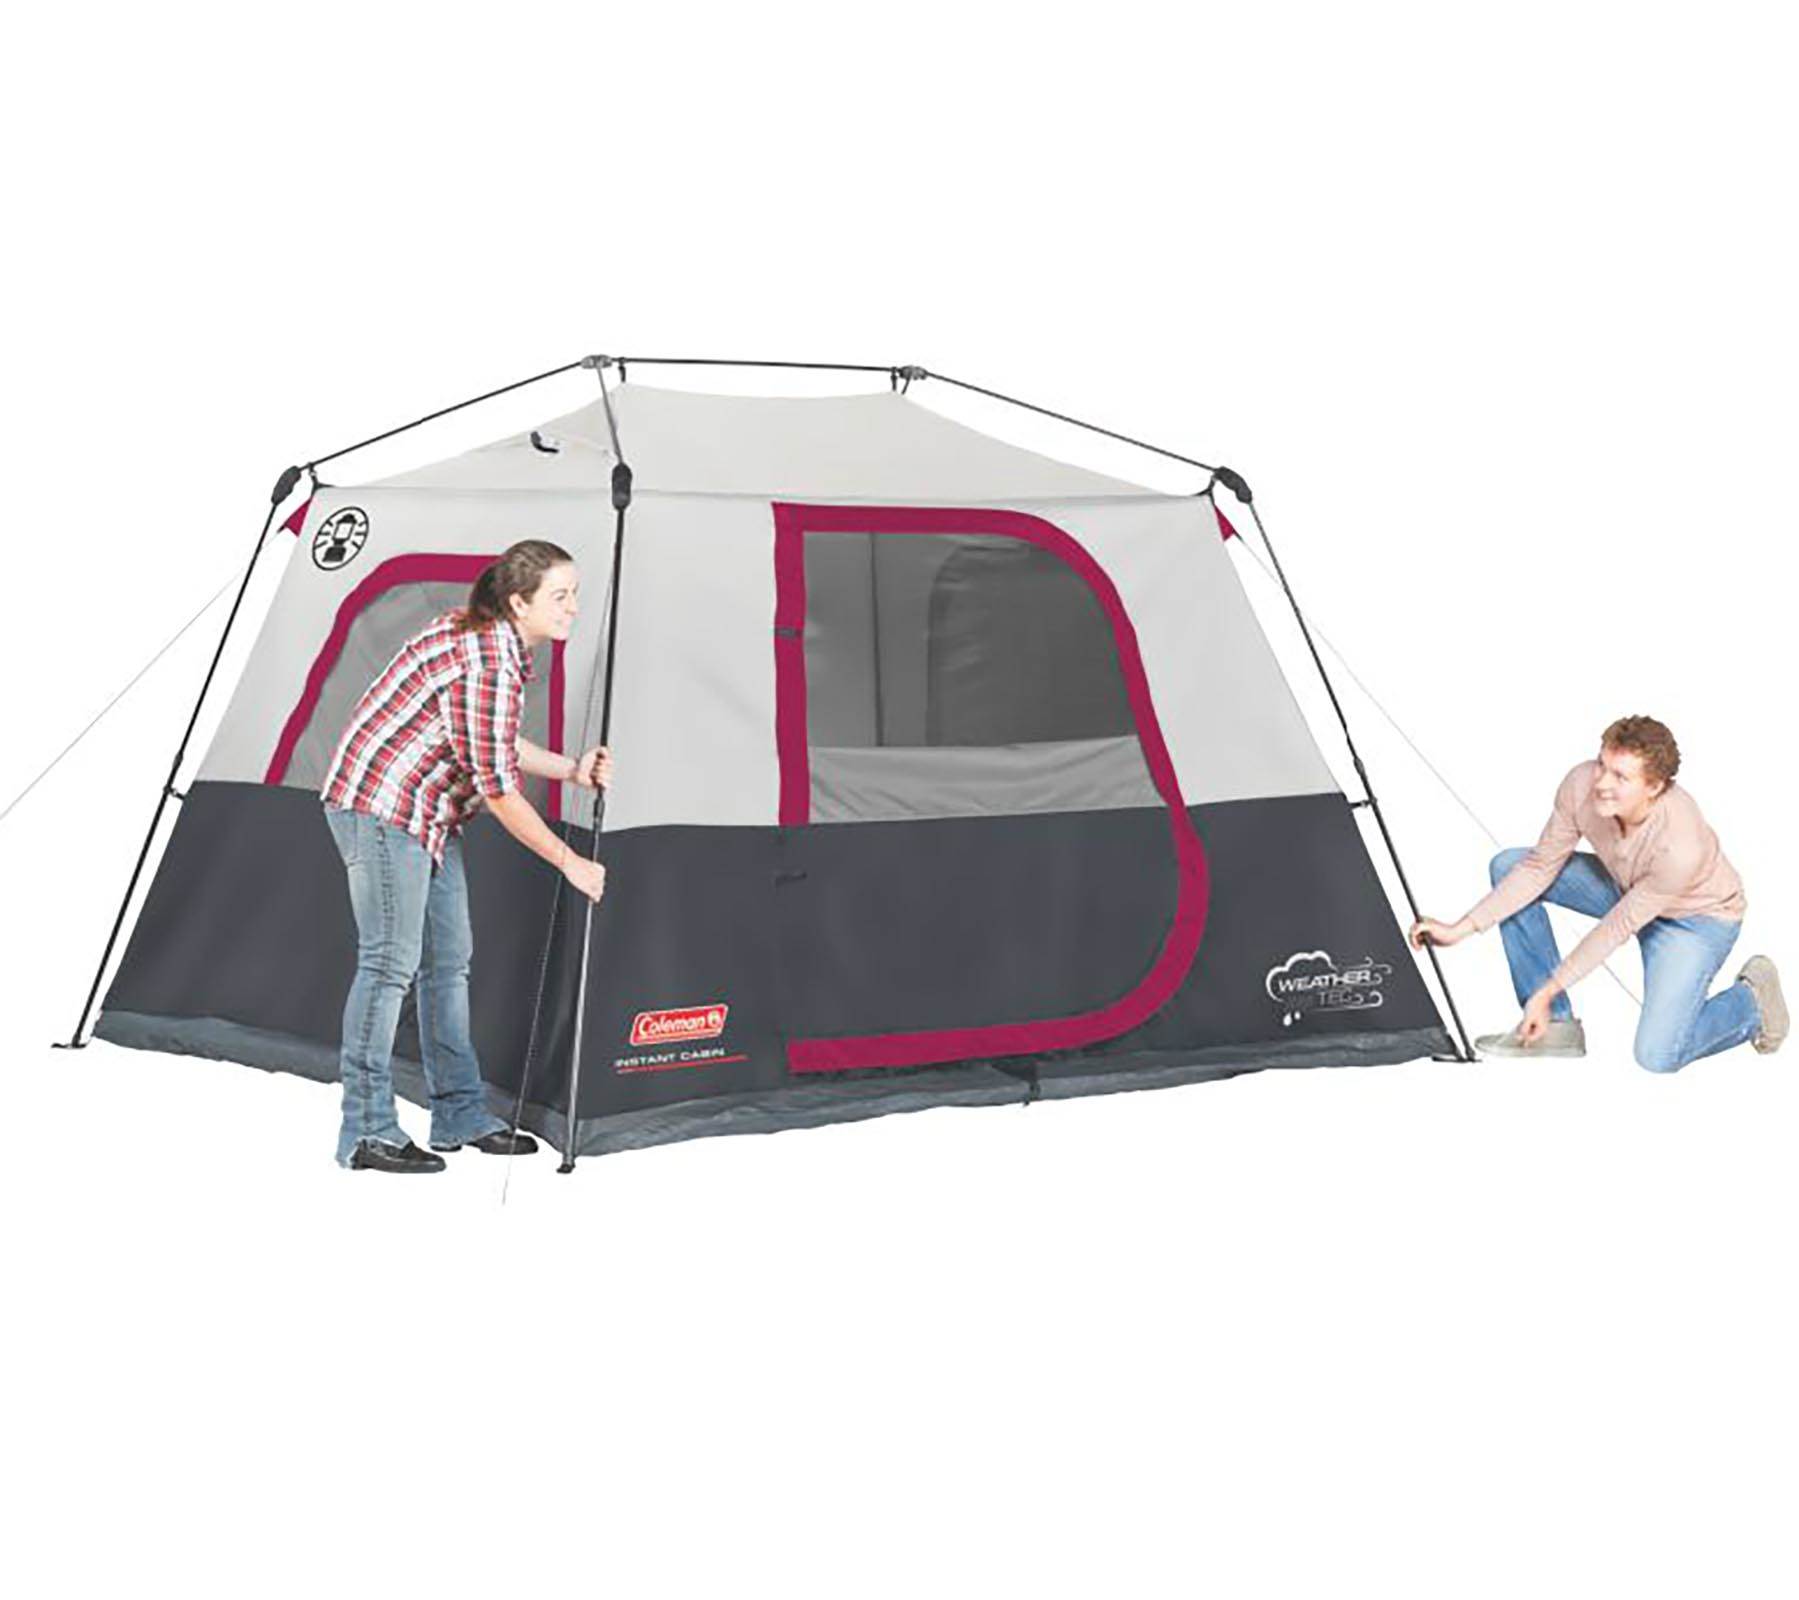 Coleman 6-Person Family Waterproof Camping Instant Cabin Tent 10 x 9 x 6 Feet - image 3 of 7